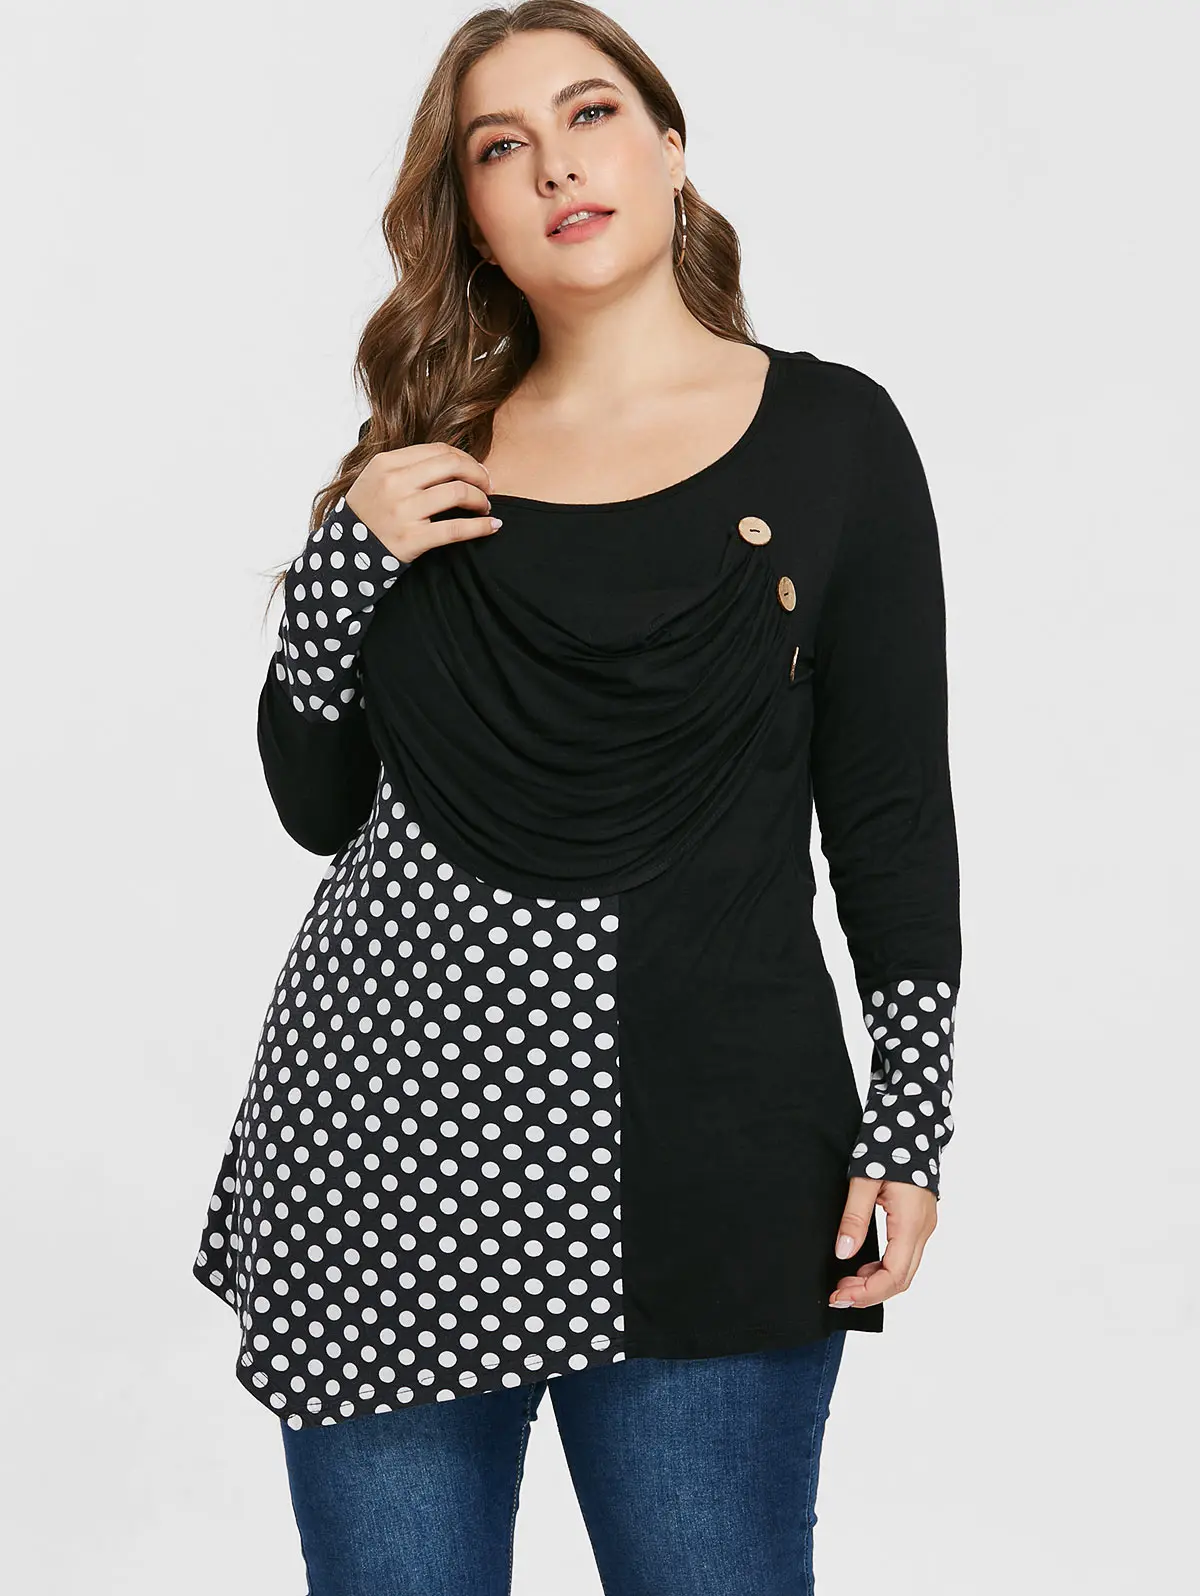 

Wipalo Plus Size 5XL Polka Dot Draped Asymmetrical Tunic T-Shirt Scoop Neck Long Sleeve Button Embellished Casual Ladies Tee Top